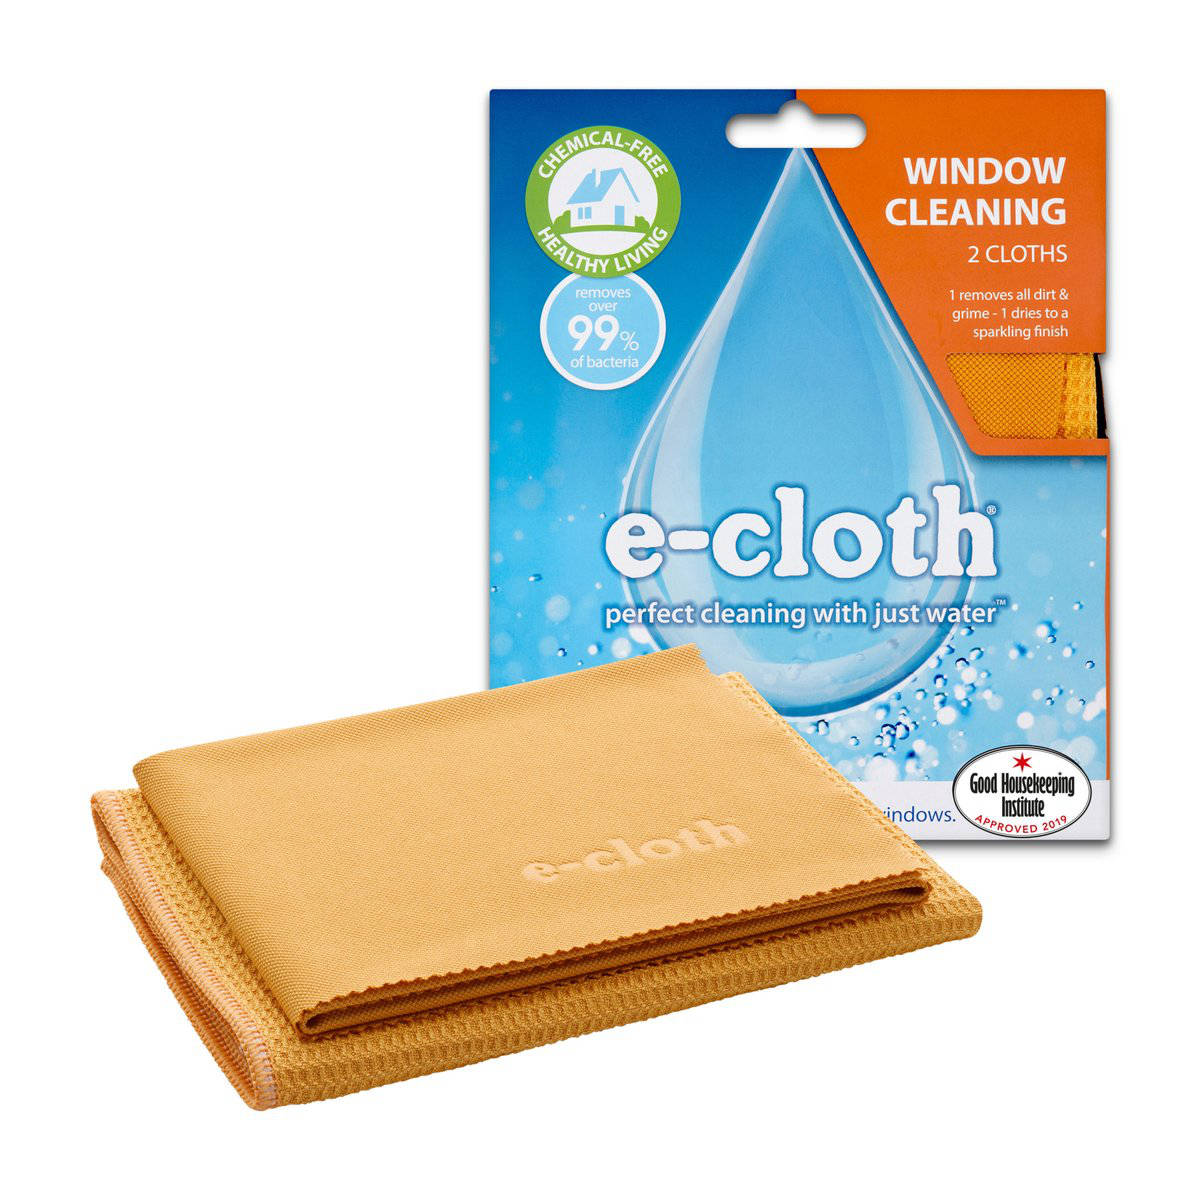 E-cloth window cleaning duo pack